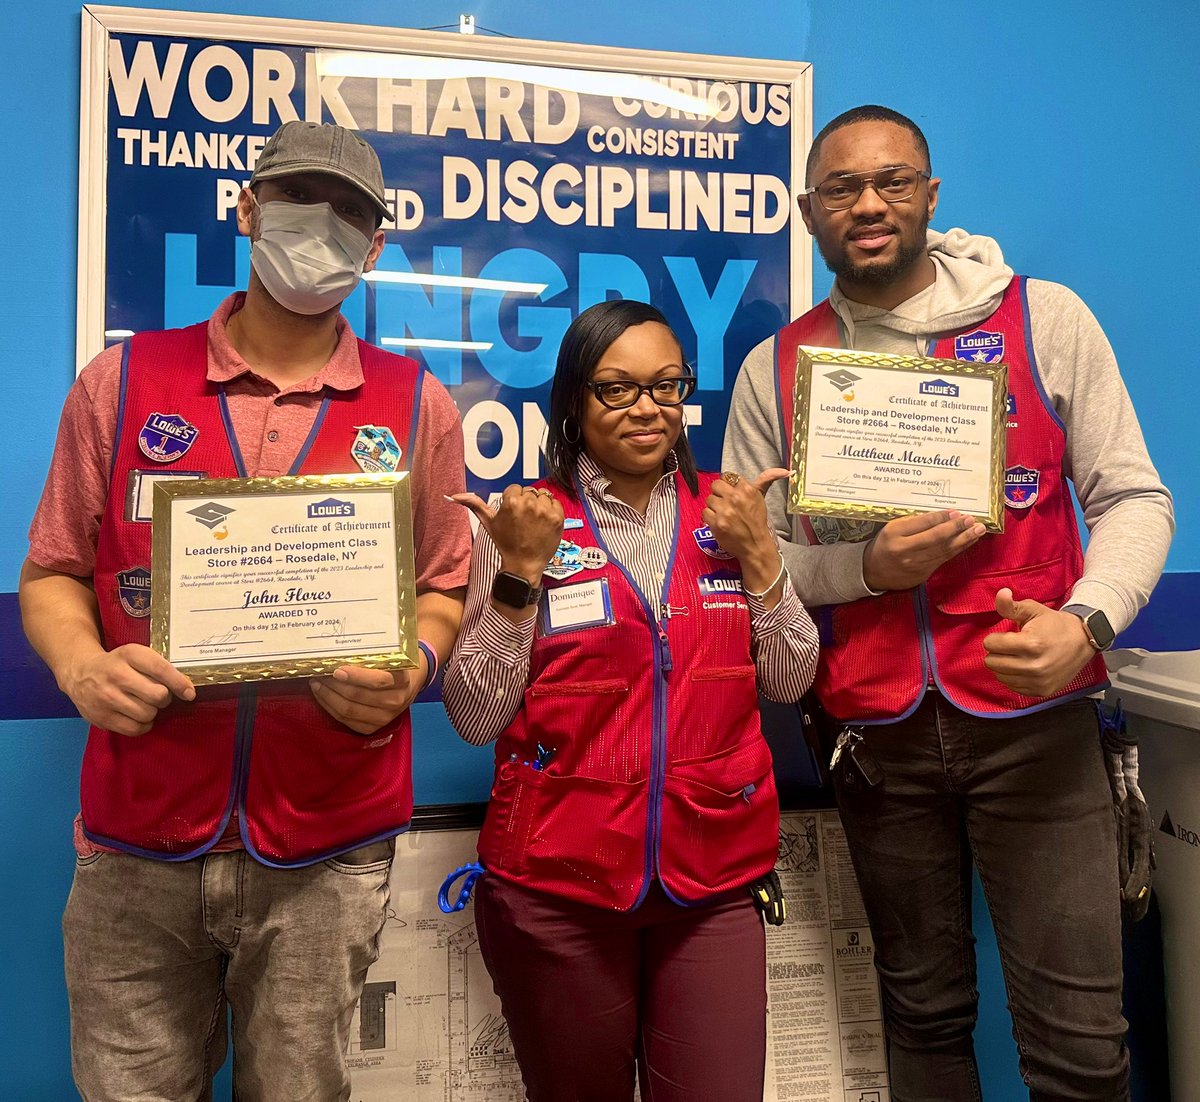 Congratulations To My Department Supervisors For Graduating From Their Leadership And Development Class !🏆🥇I Am Honored To Be Your Leader ! Continue Being Great And Remain Hungry To Win ! #Lowes2664 #HungryToWin #1Team1Dream @Houghton1366 @SamCharles07 @Matt2664 @JohnFlores2664